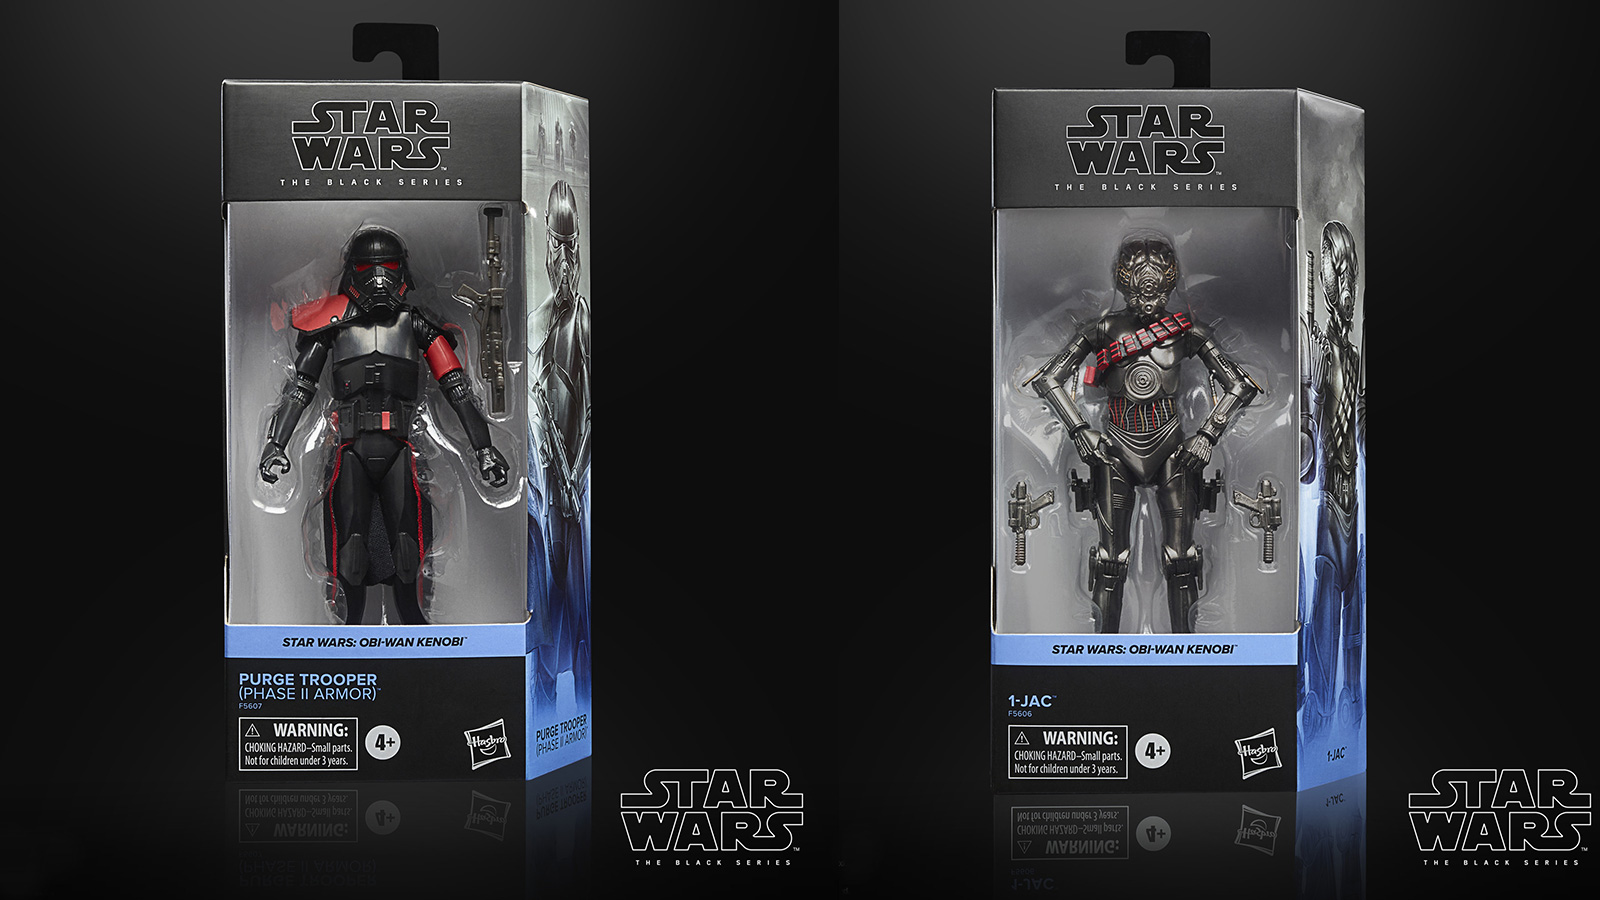 Walmart Delays Preorders For Exclusive 1-JAC And Purge Trooper (Phase II Armor) Figures?